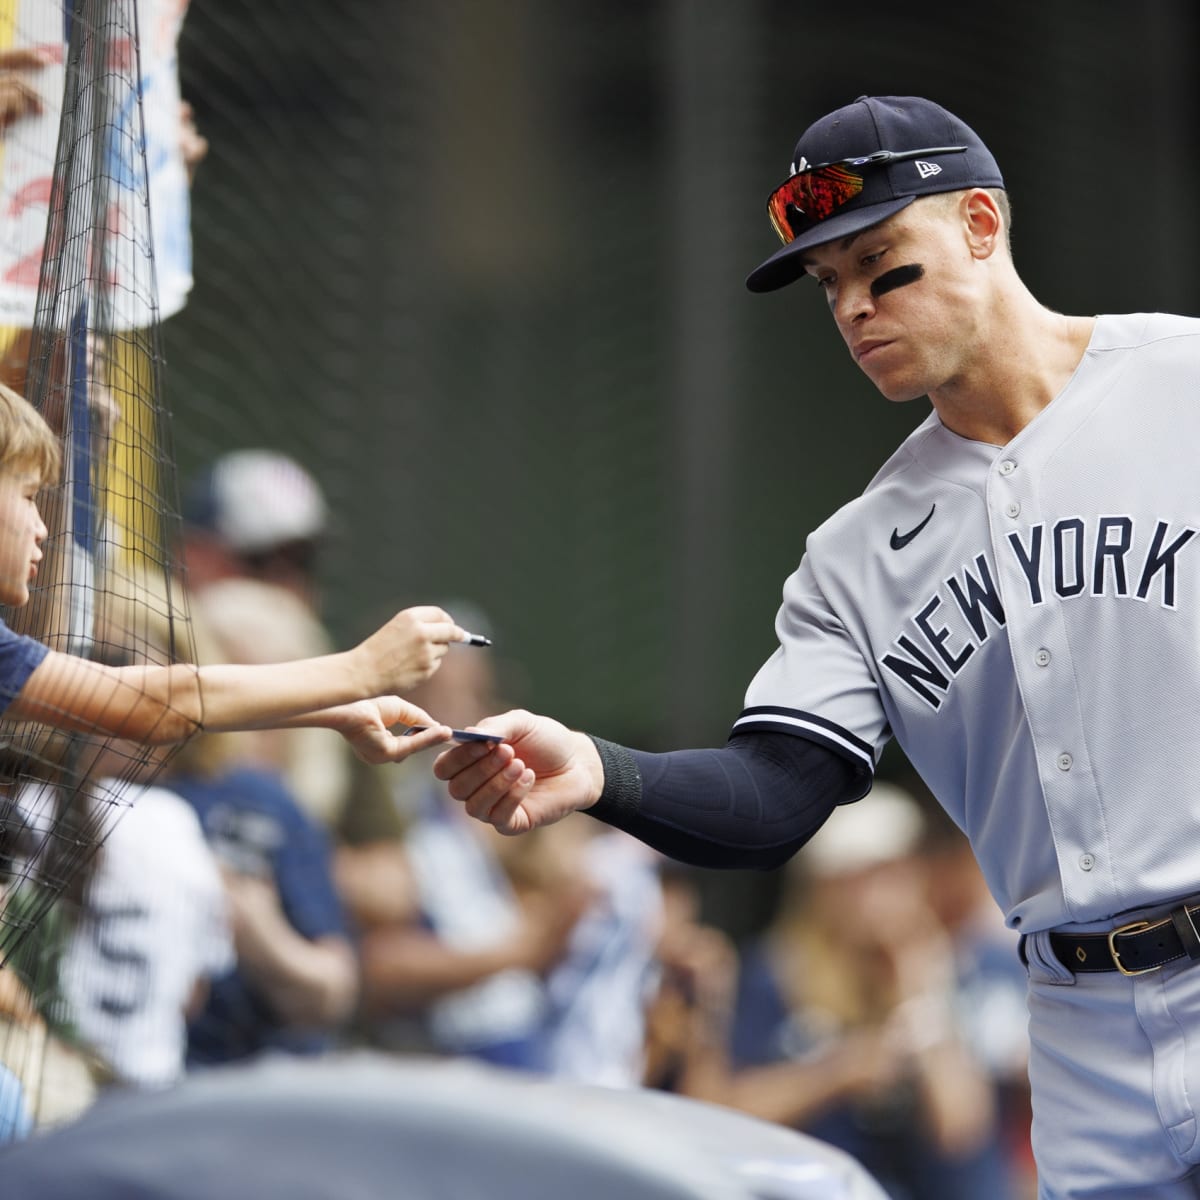 VIRAL: Video Of Aaron Judge Asked About His Future With The New